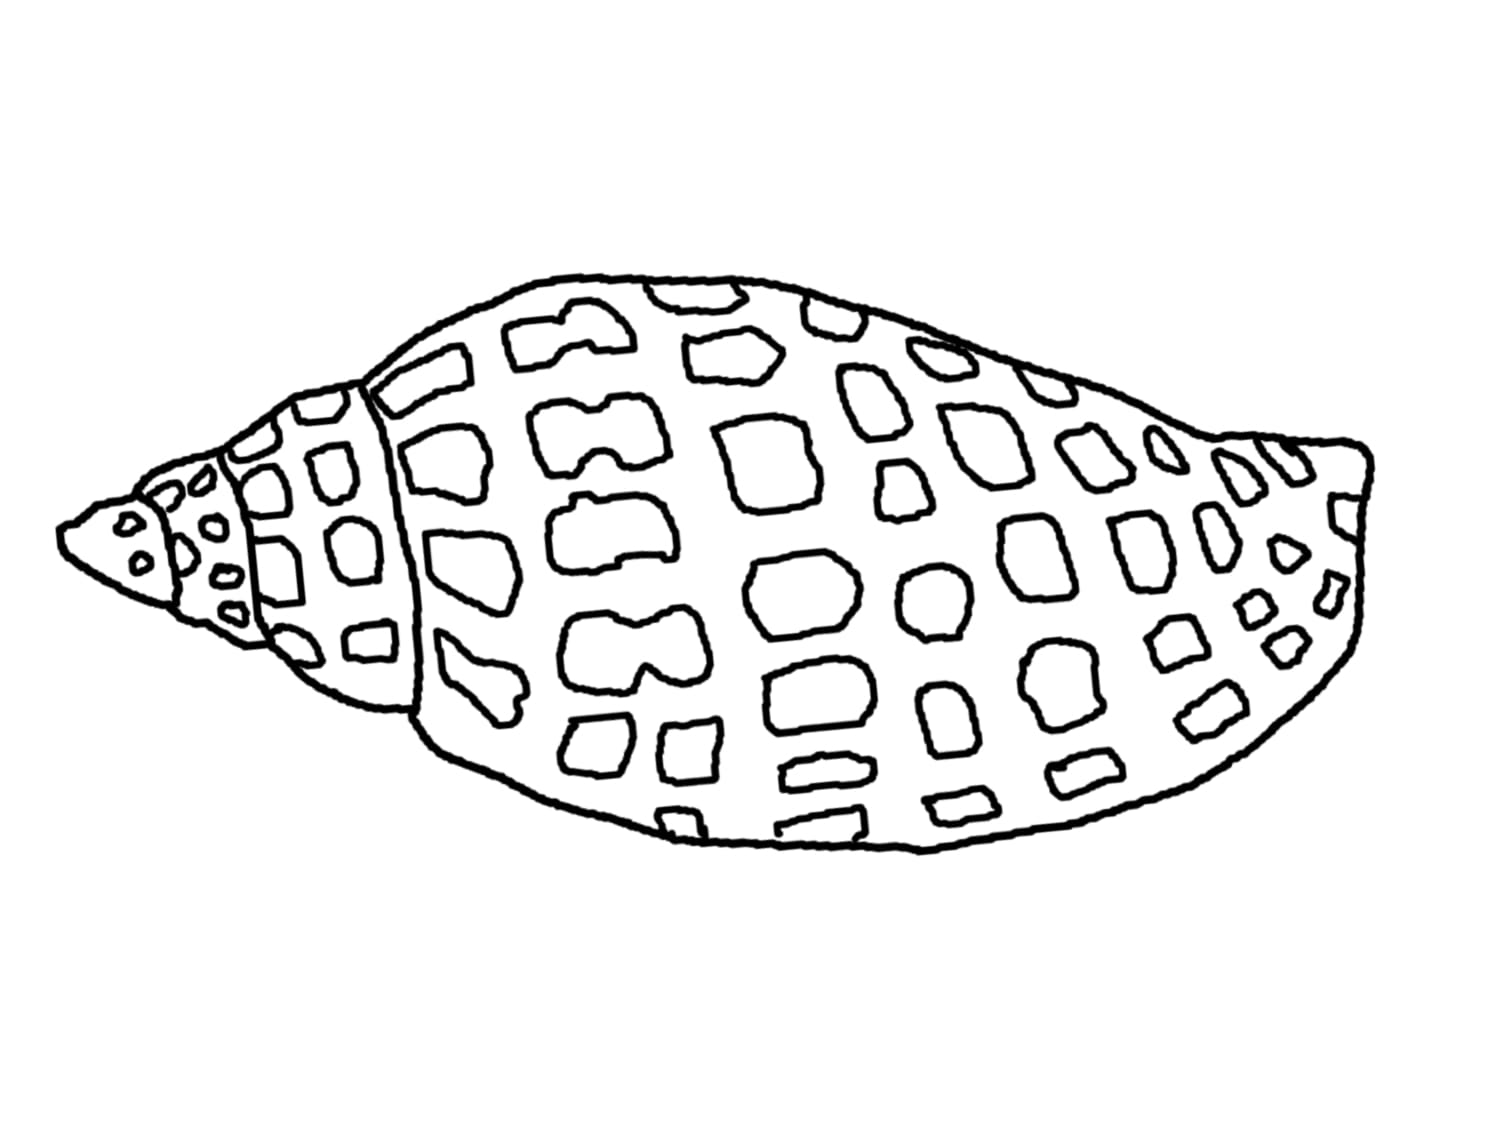 Sea Shells Image For Kids Coloring Page